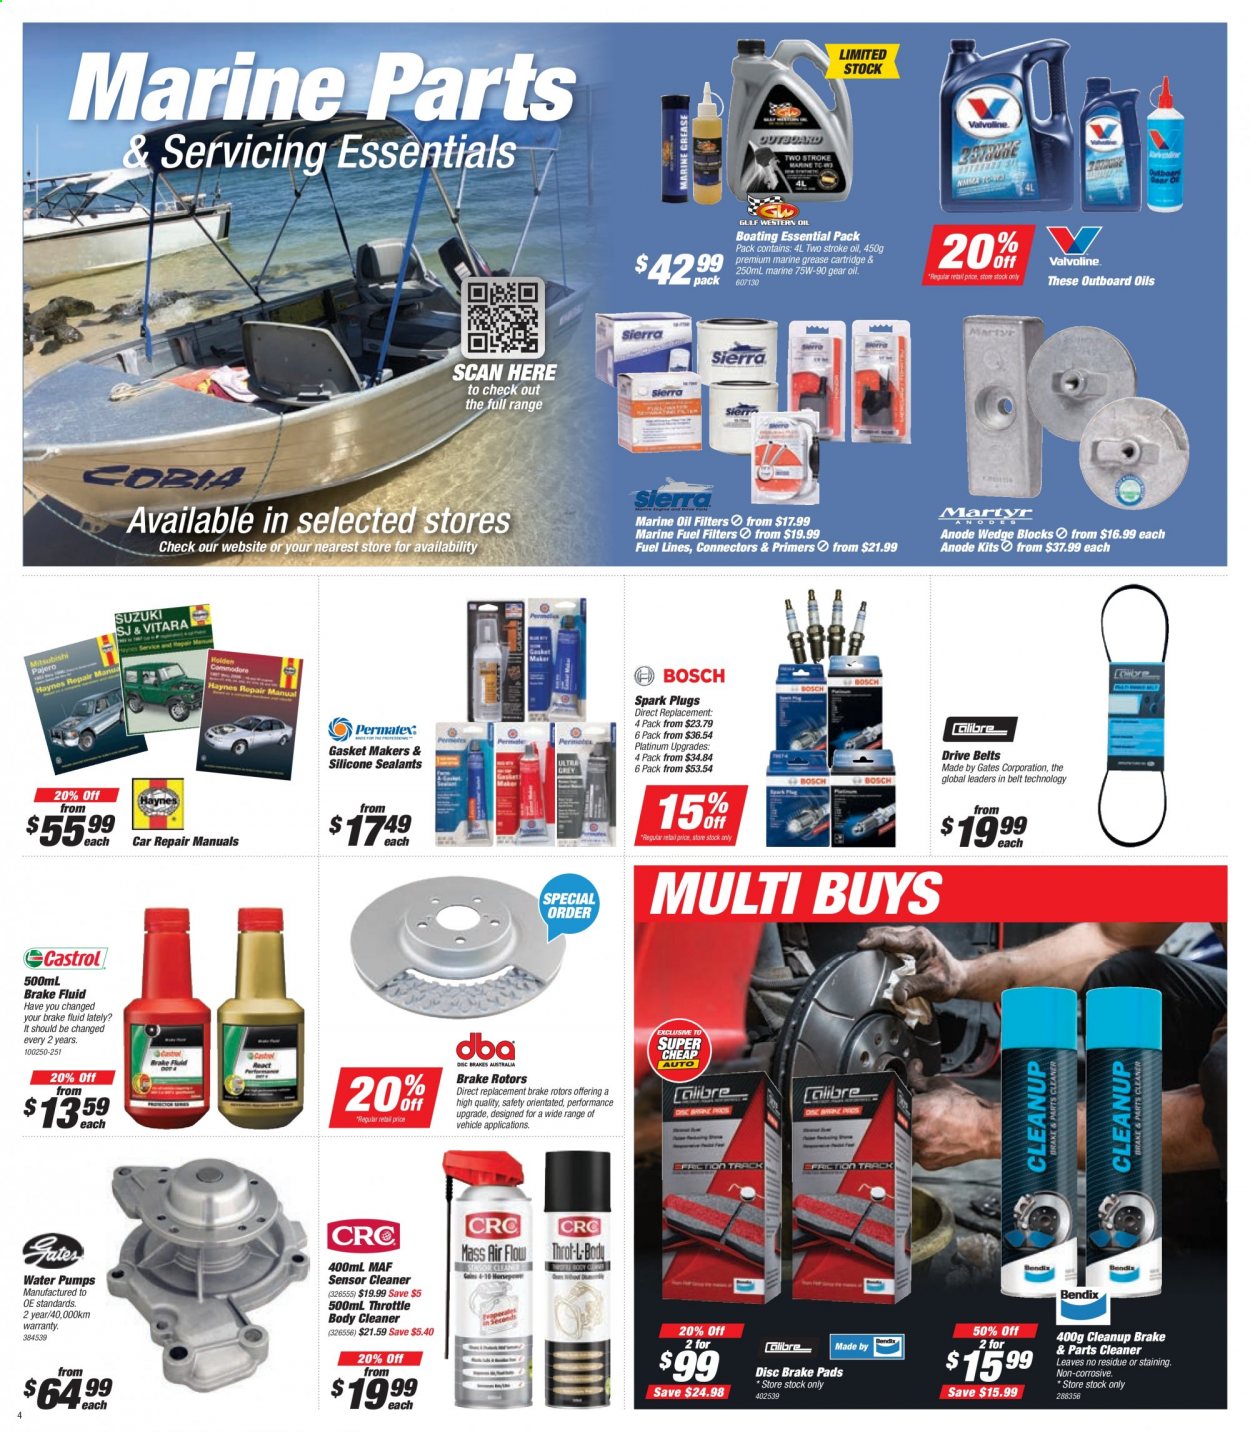 thumbnail - SuperCheap Auto mailer - 11.02.2021 - 21.02.2021 - Sales products - Bosch, water pump, fuel filter, brake pad, spark plugs, oil filter, car repair manuals, brake rotors, Gulf Western Oil, silicone sealants, cleaner, Valvoline, Castrol, brake fluid. Page 4.